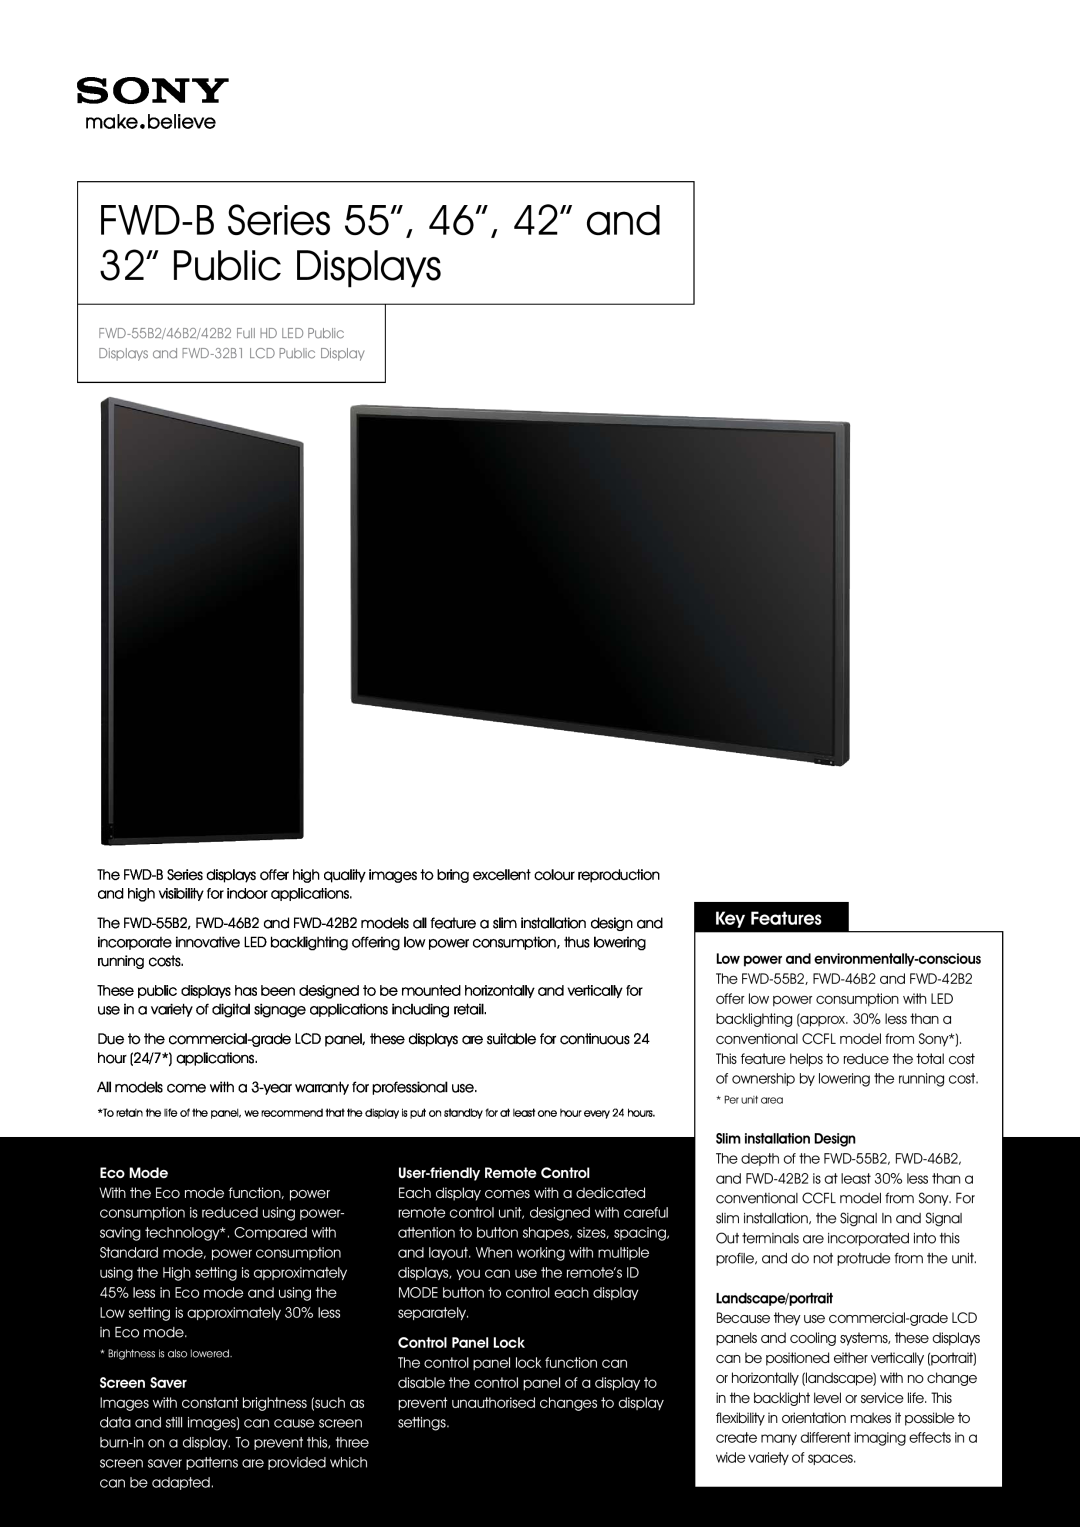 Sony FWD46B2TOUCH warranty Key Features, FWD-B Series 55”, 46”, 42” and 32” Public Displays 